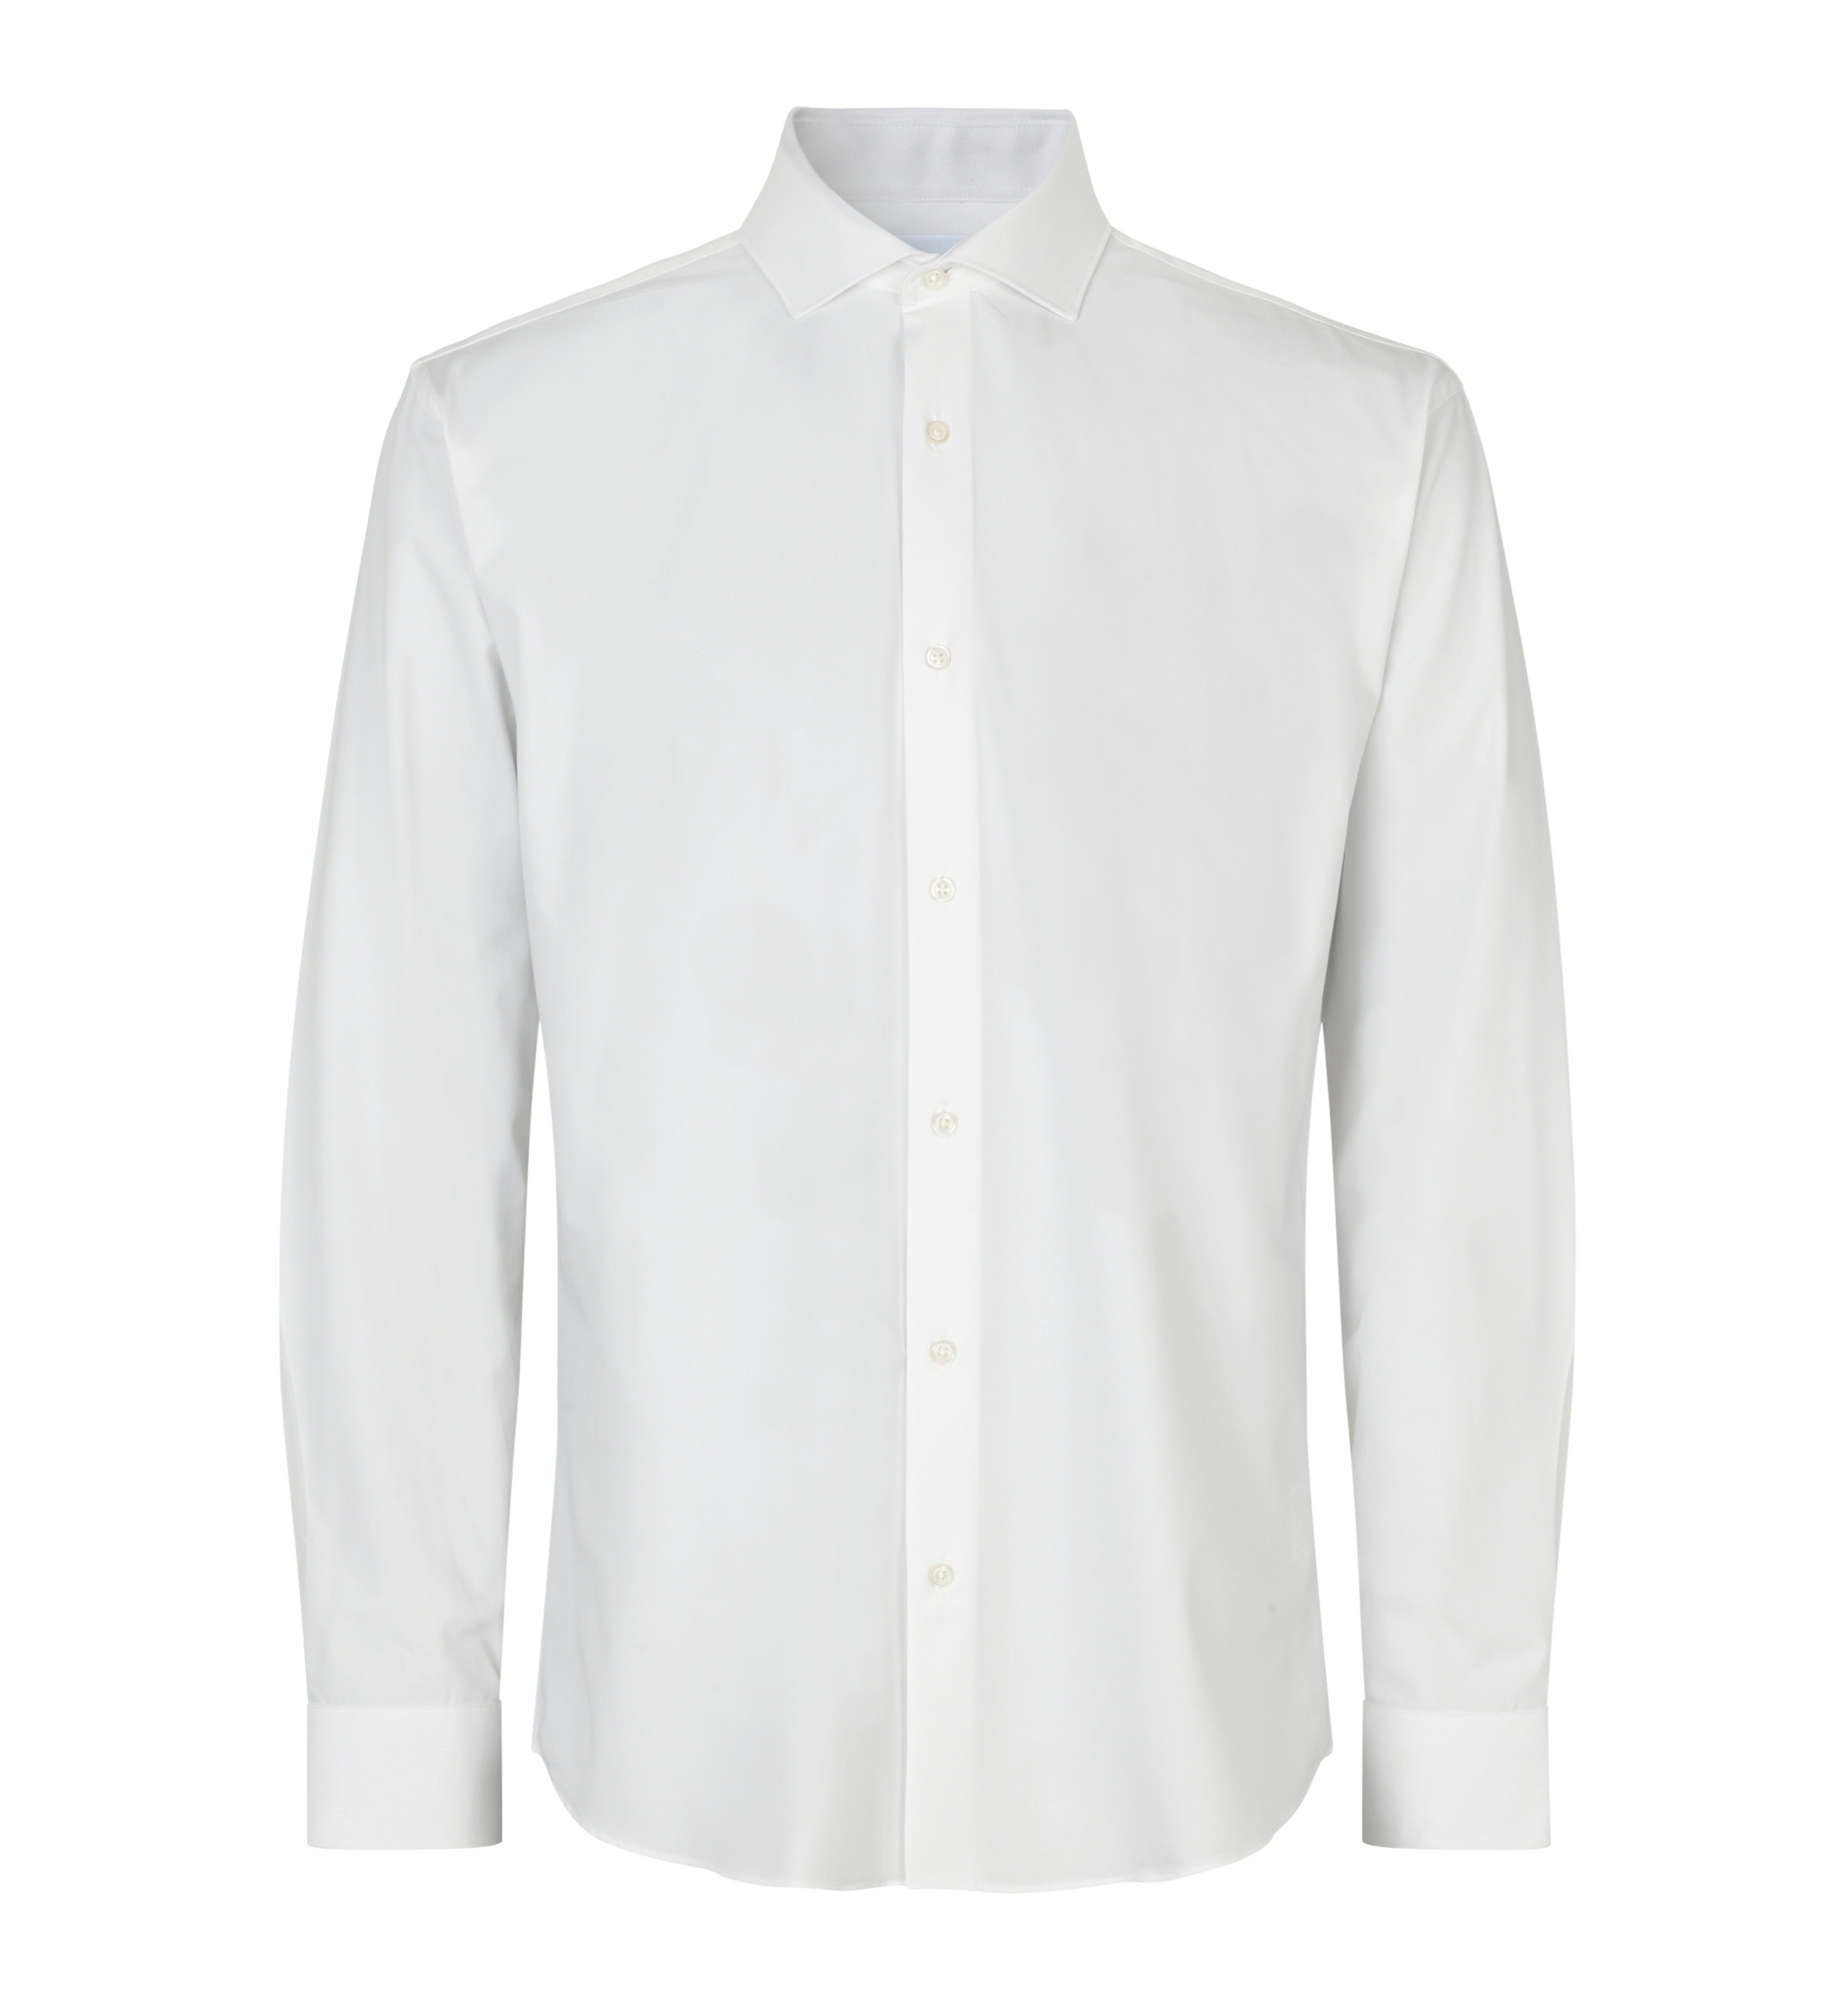 Picture of Hybrid men's shirt 